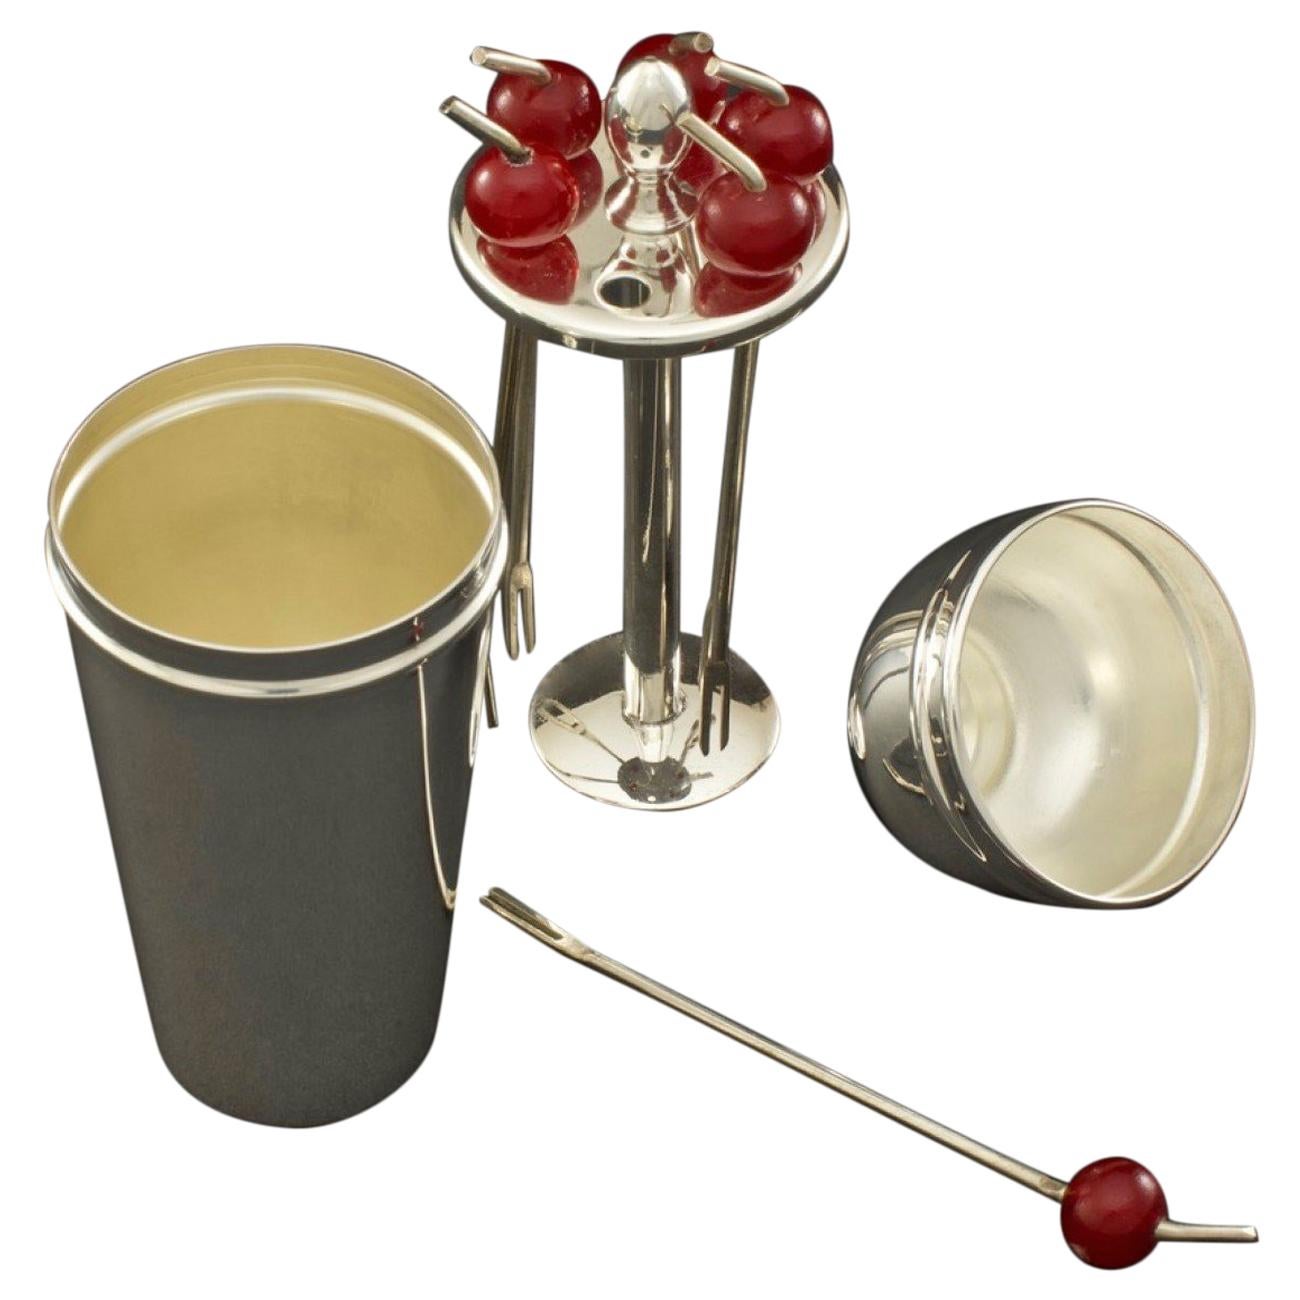 Cocktail Cherry Sticks in a Silver Plated Miniature Cocktail Shaker, circa 1935